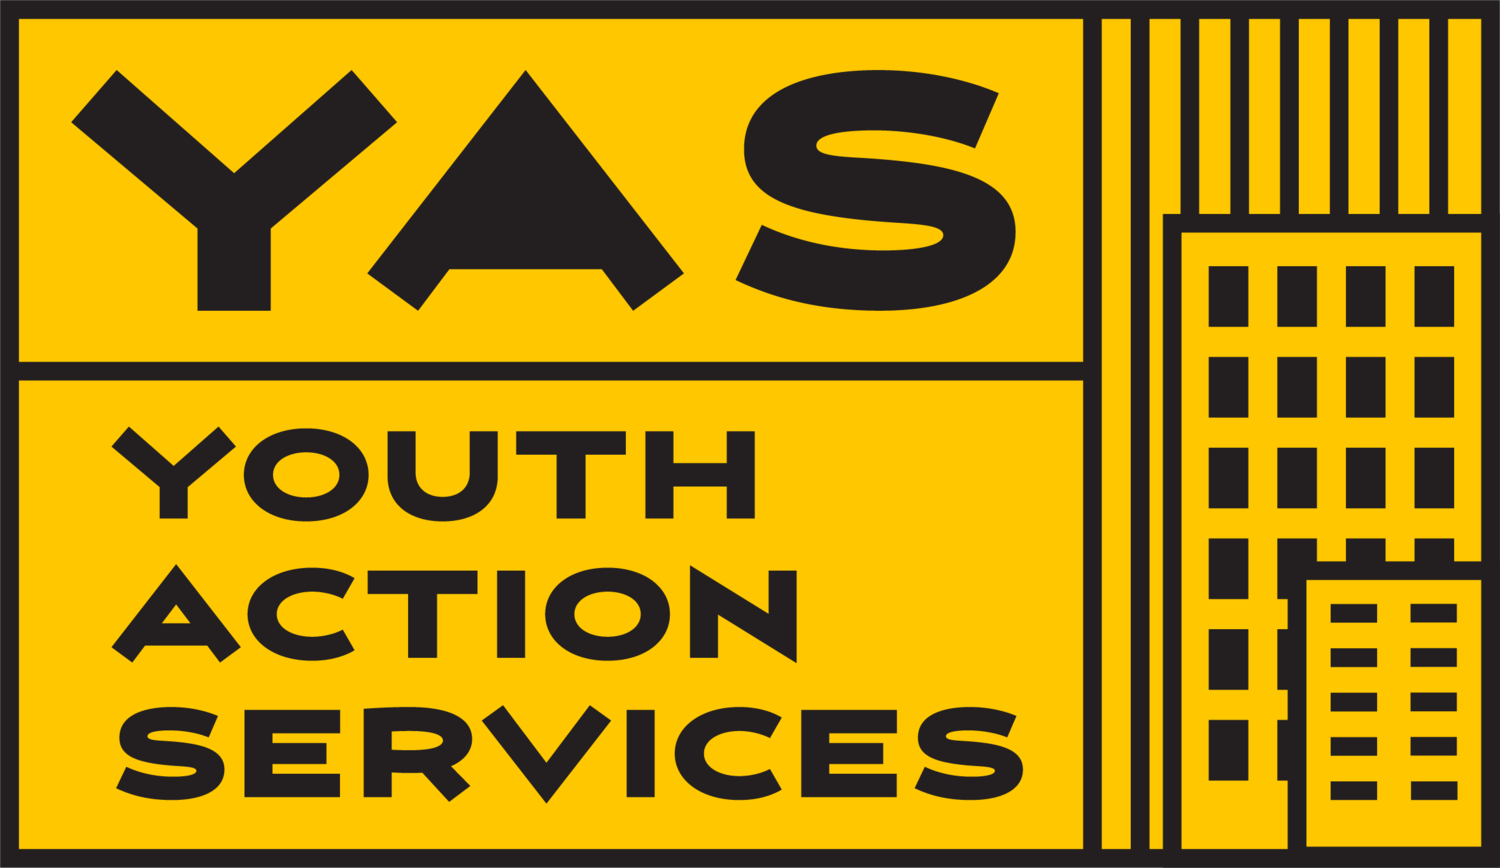 Youth Action Services Inc